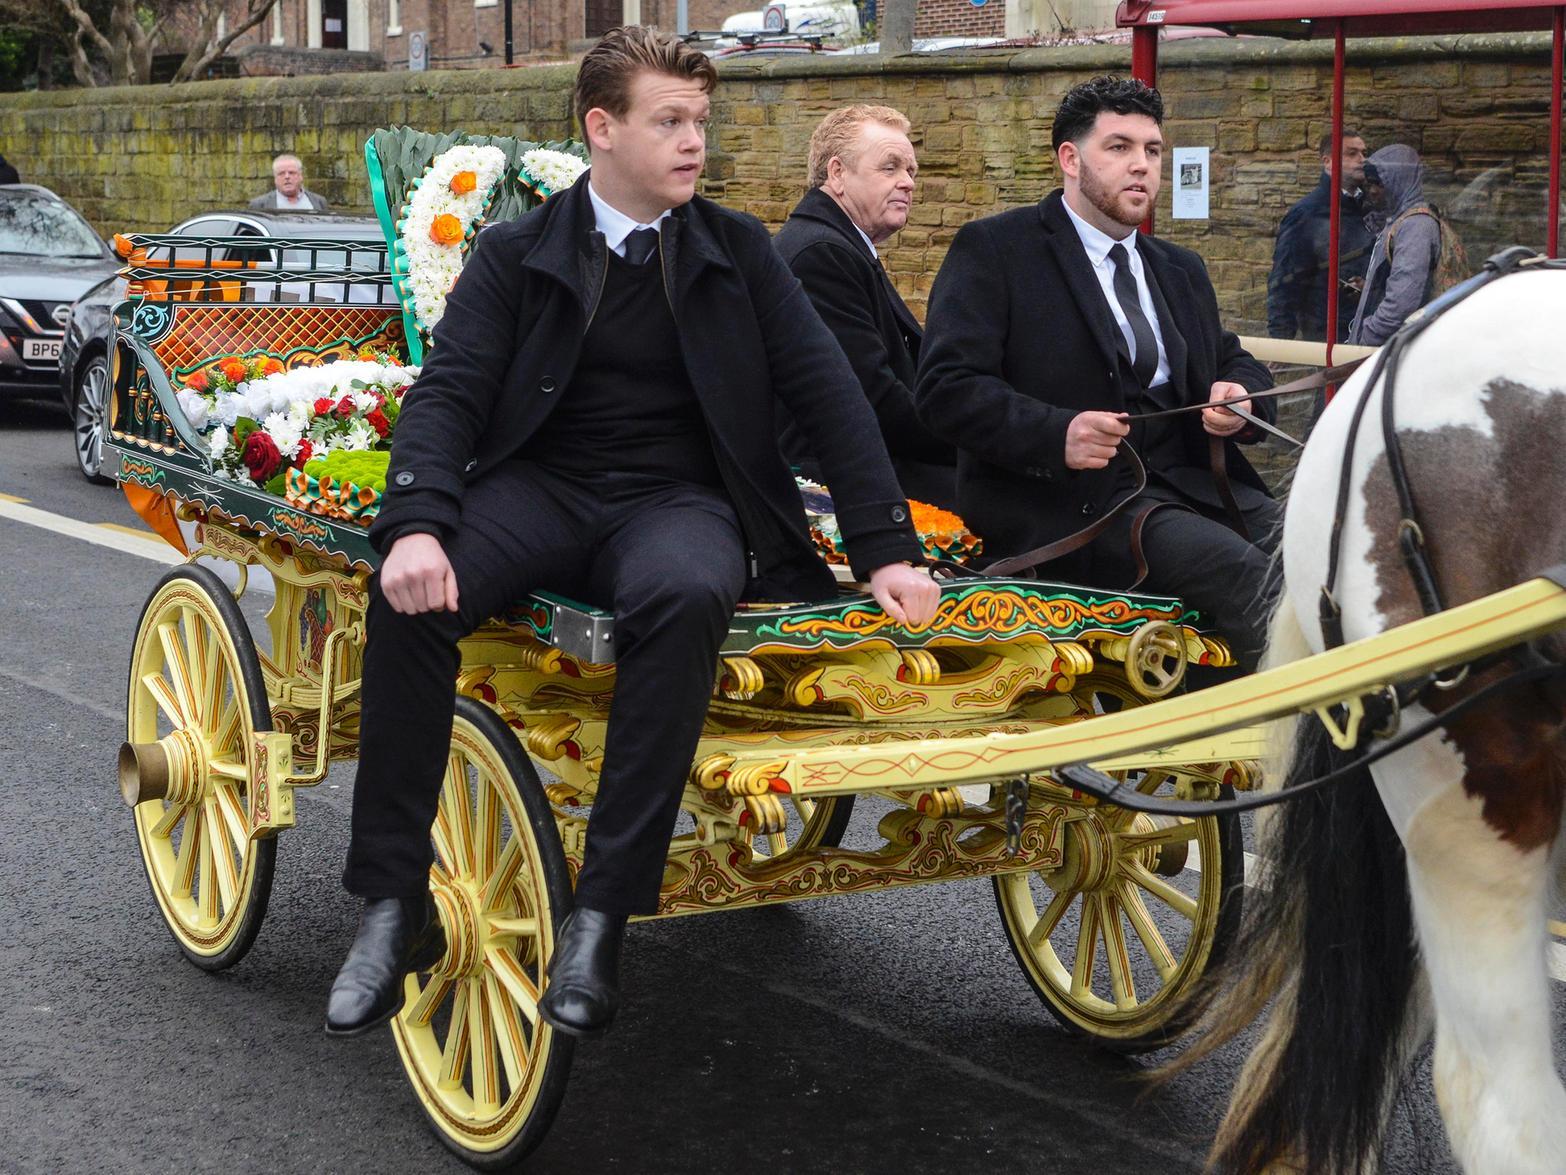 Mourners travel on a horse-drawn carriage to the church cc SWNS